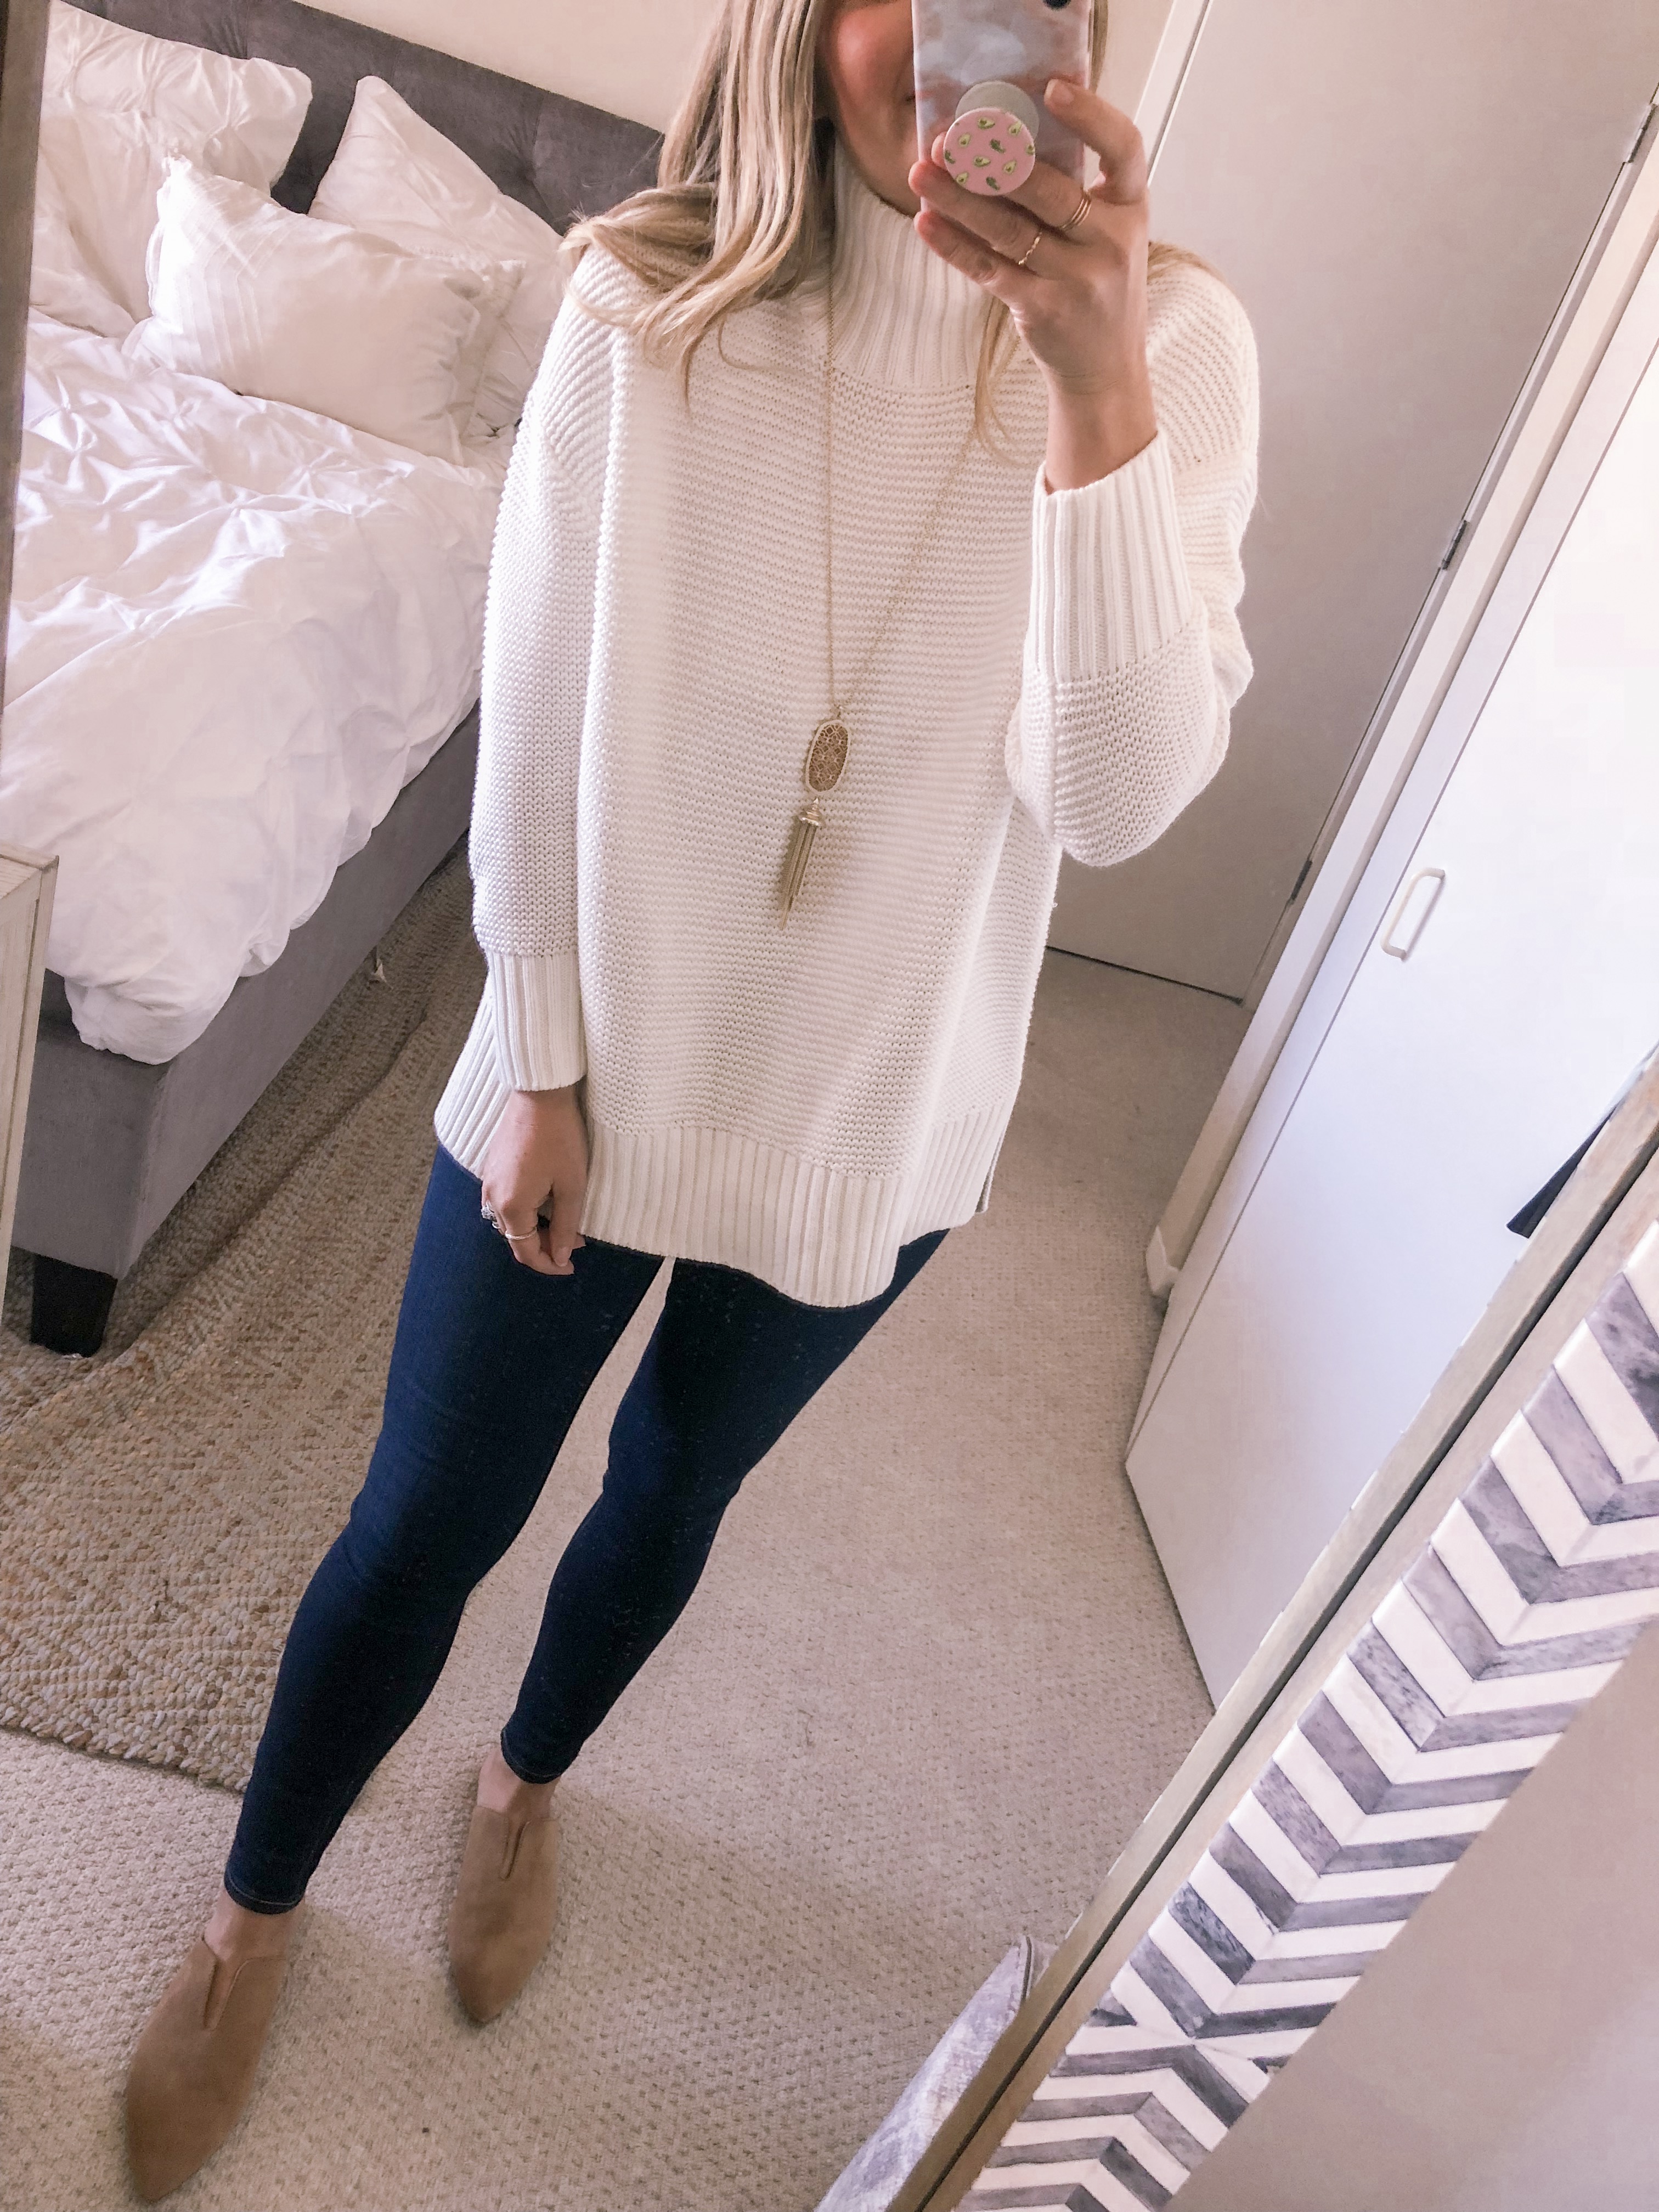 Popular Chicago fashion blogger Visions of Vogue shares a white mockneck sweater by French Connection with the Kendra Scott Rayne Necklace for a fall fashion outfit idea.